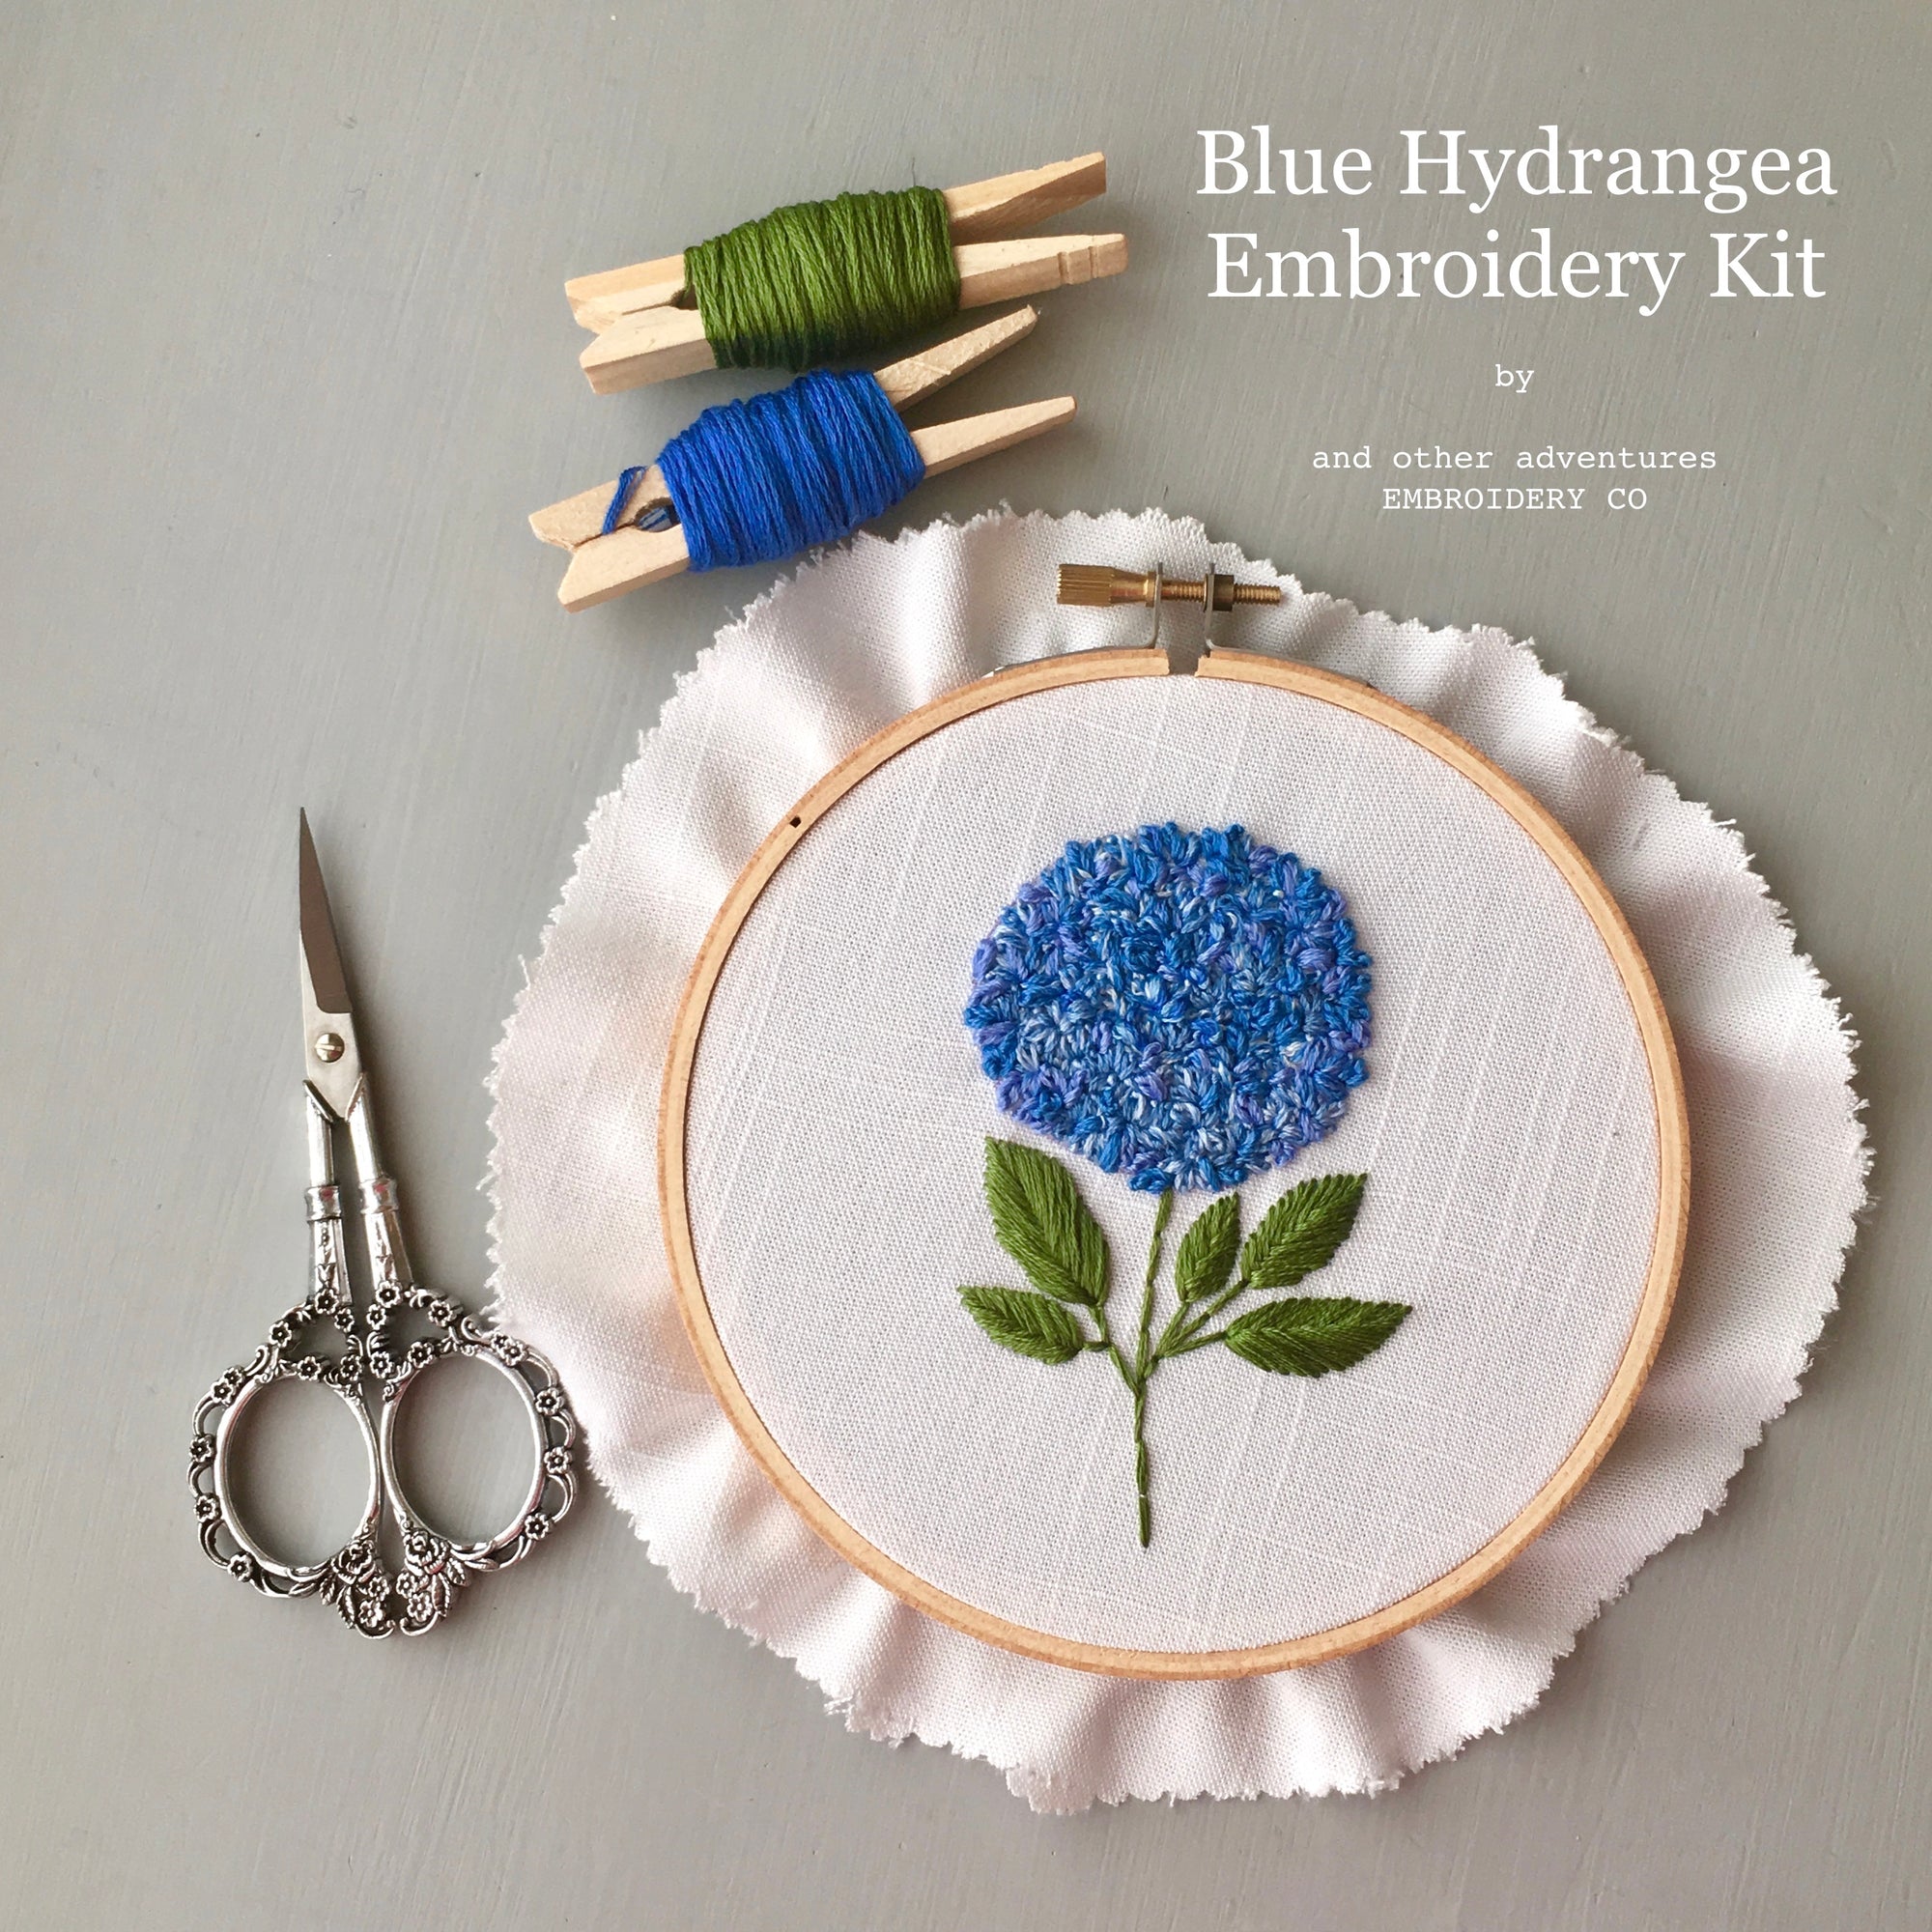 Modern Hand Embroidery Kit - Blue Hydrangea by And Other Adventures Embroidery Co